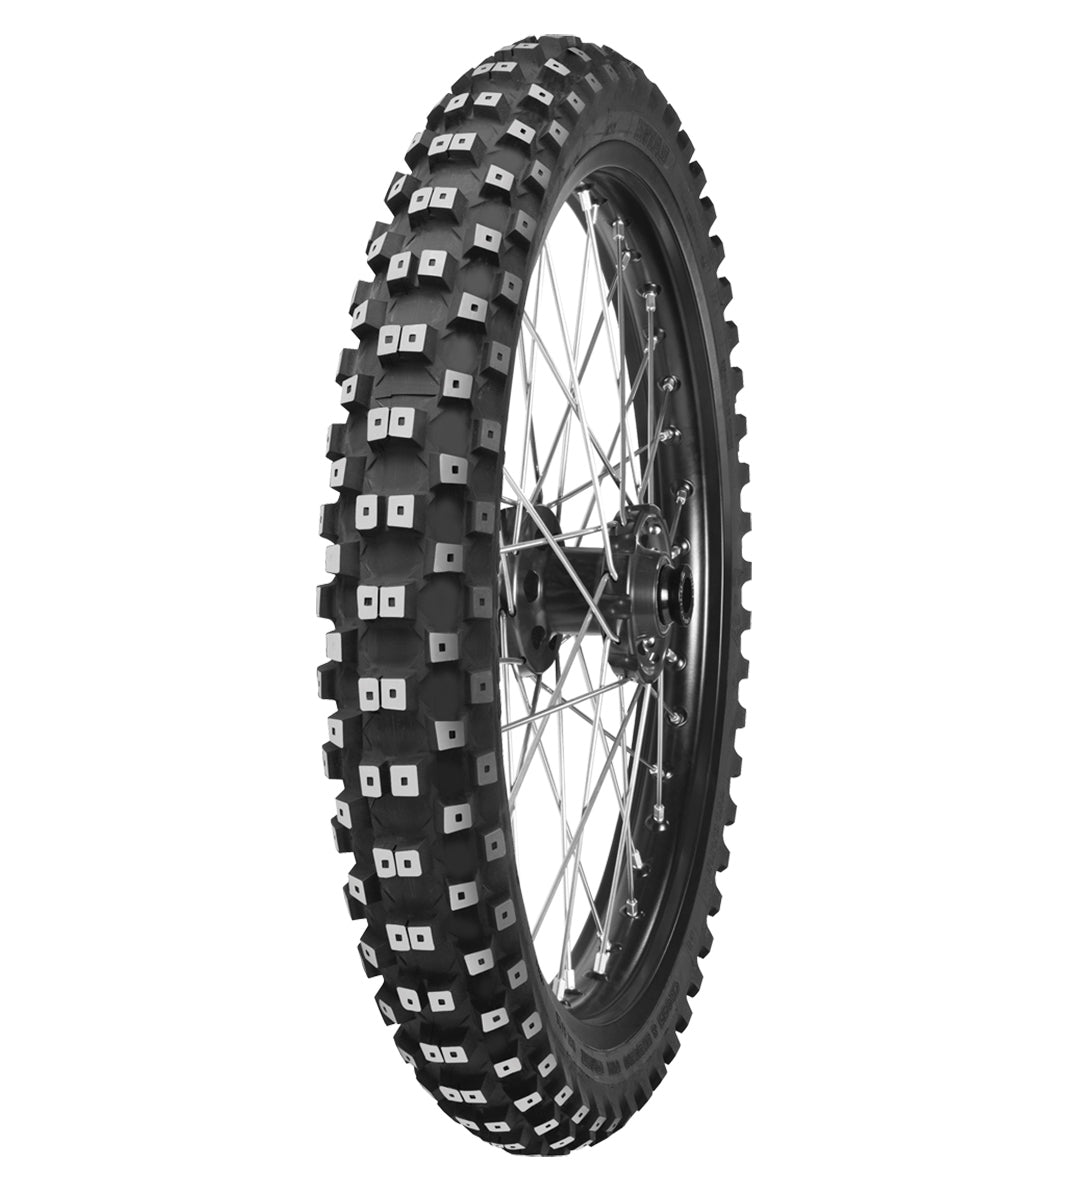 Mitas C-17 STONEATER 90/90-21 All-Terrain Off-Road 54R No Stripe Tube Front Tire, 226708, 90/90-21, All-Terrain, C-17 StonEater, Front, Off-Road, Tires - Imported and distributed in North &amp; South America by Lindeco Genuine Powersports - Premier Powersports Equipment and Accessories for Motorcycle Enthusiasts, Professional Riders and Dealers.